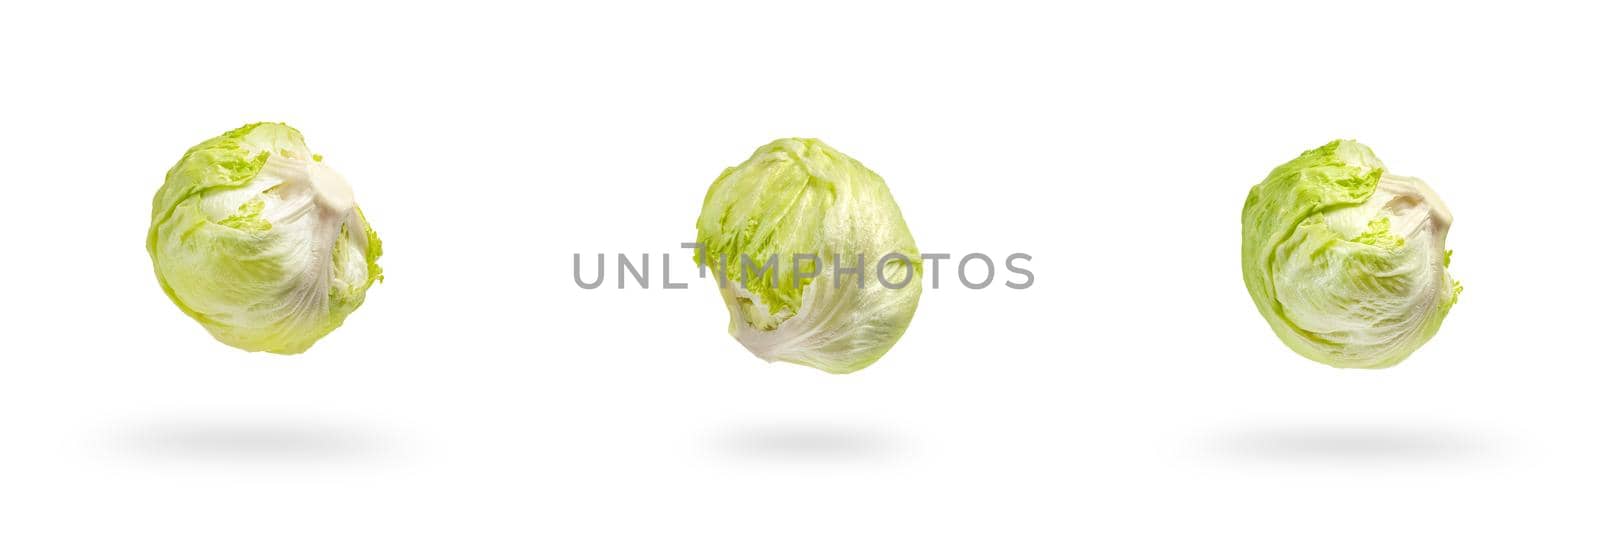 Set green iceberg lettuce on white isolated background, drops casting shadow. Iceberg green salad for making popular burgers by SERSOL